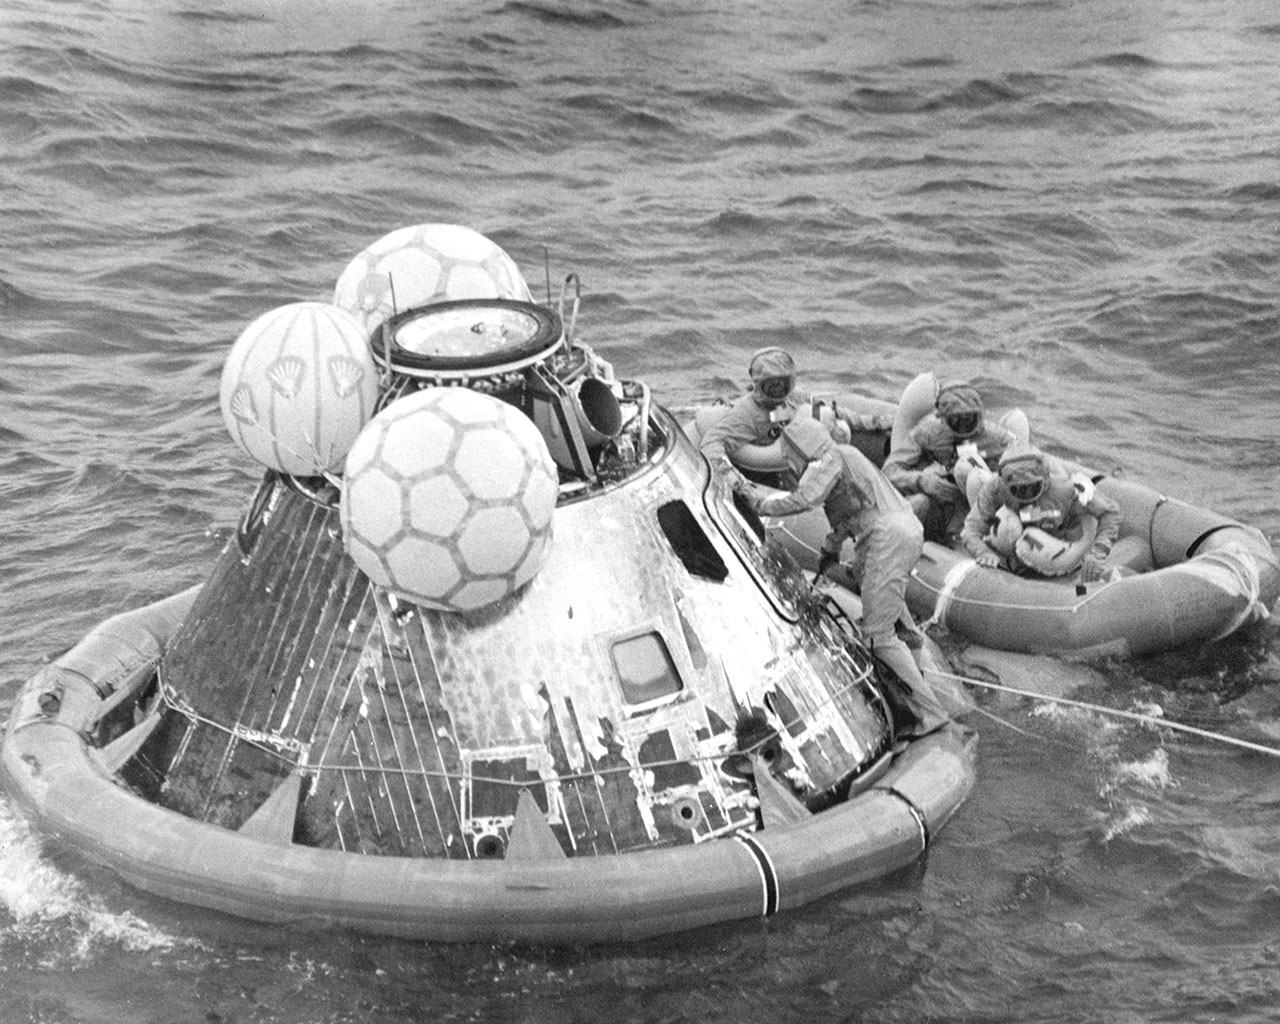 After splashdown in the Pacific Ocean, the Apollo 11 astronauts wait in the life raft as a pararescue man closes and secures the capsule hatch. The crew was then air lifted to the prime recovery ship, the USS Hornet, where they were housed in a Mobile Quarantine Facility (MQF). Image credit: NASA (Milt Putnam)